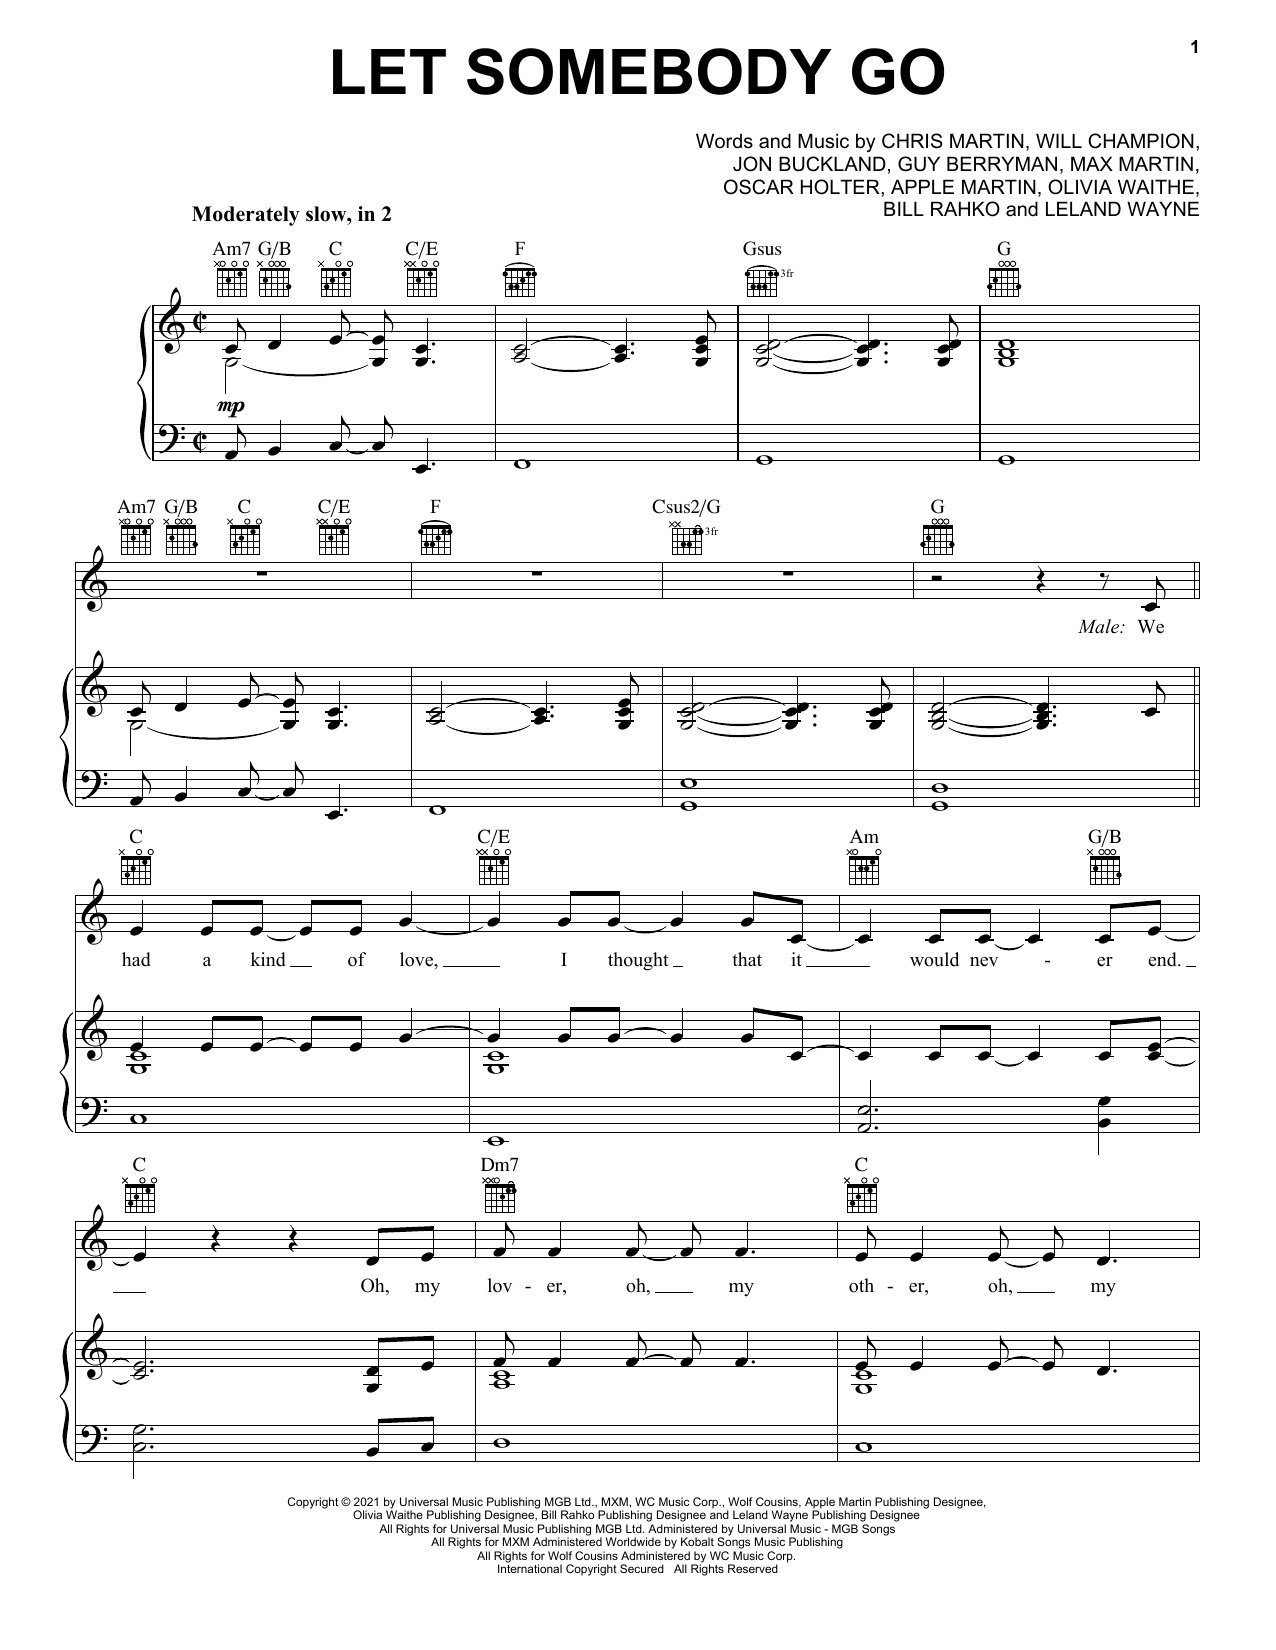 Download Coldplay Let Somebody Go (feat. Selena Gomez) Sheet Music